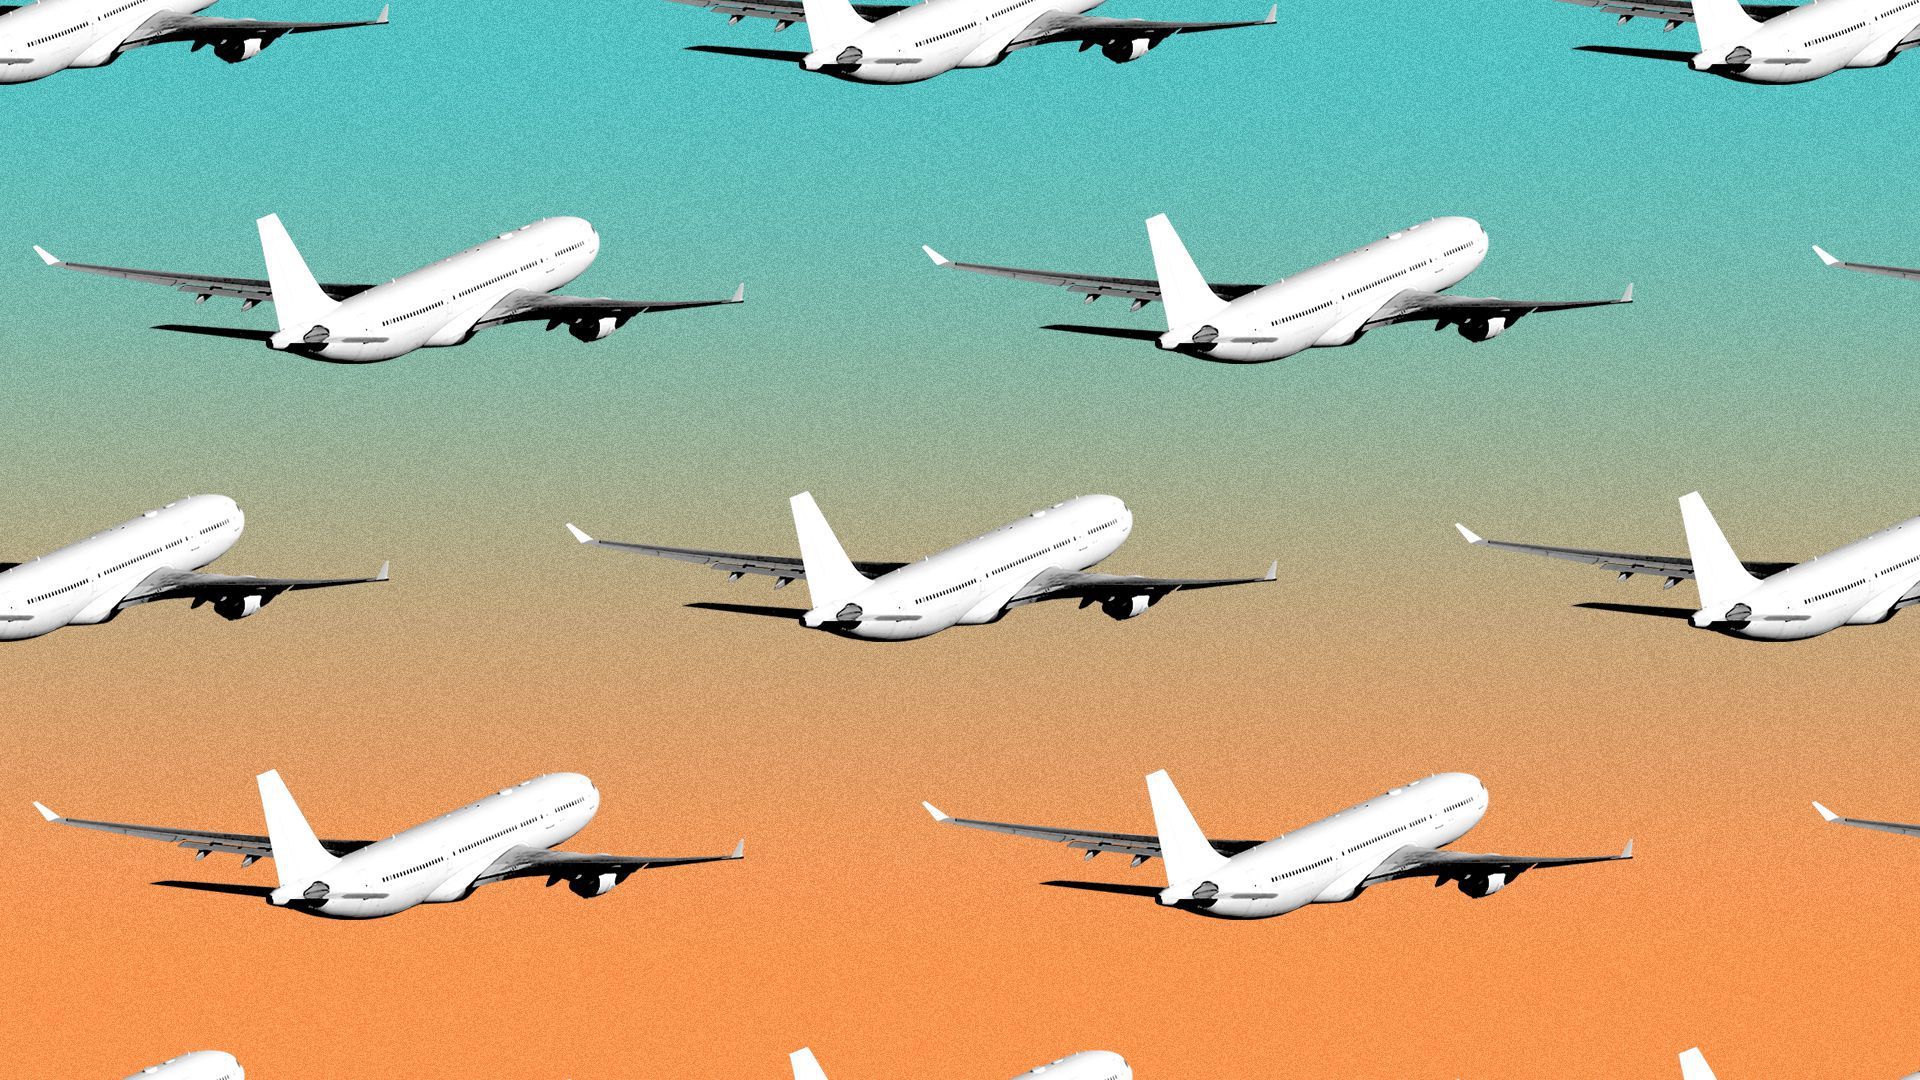 An illustration of airplanes.